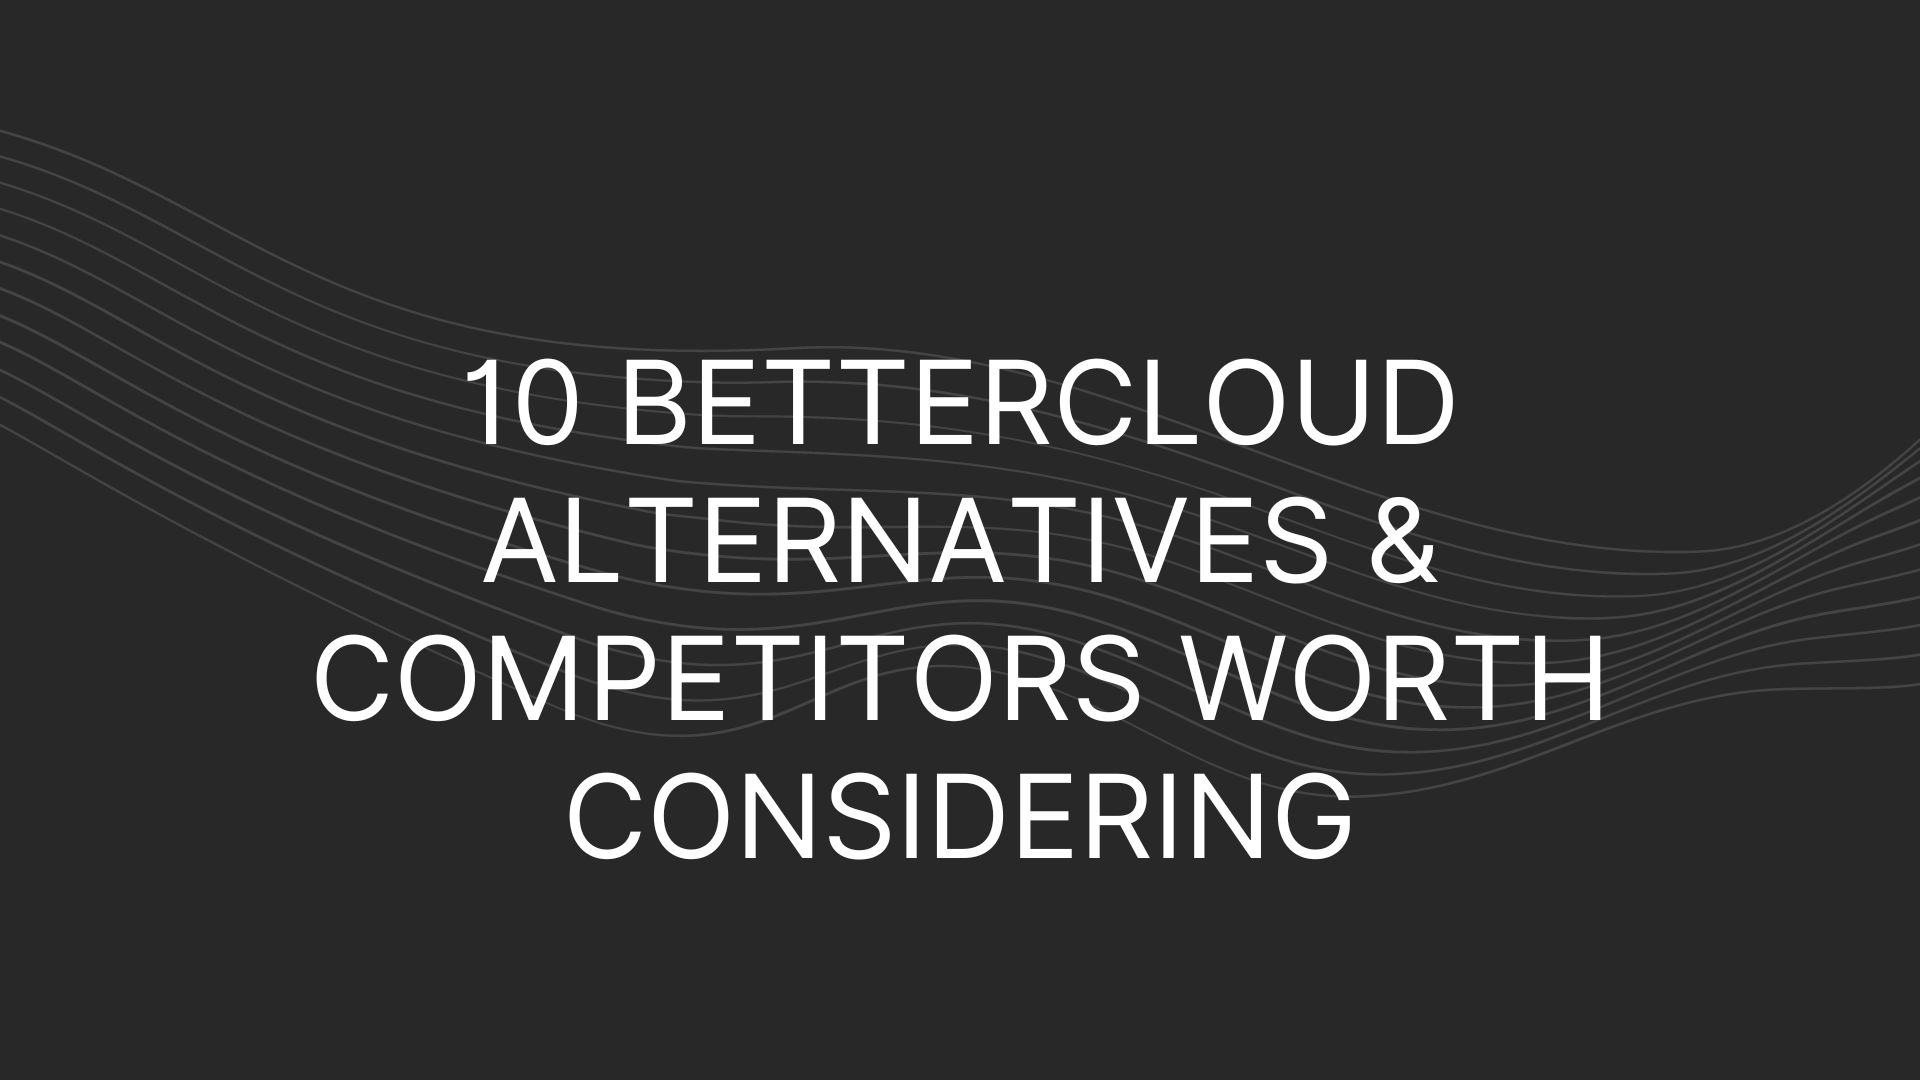 10 BetterCloud Alternatives & Competitors Worth Considering